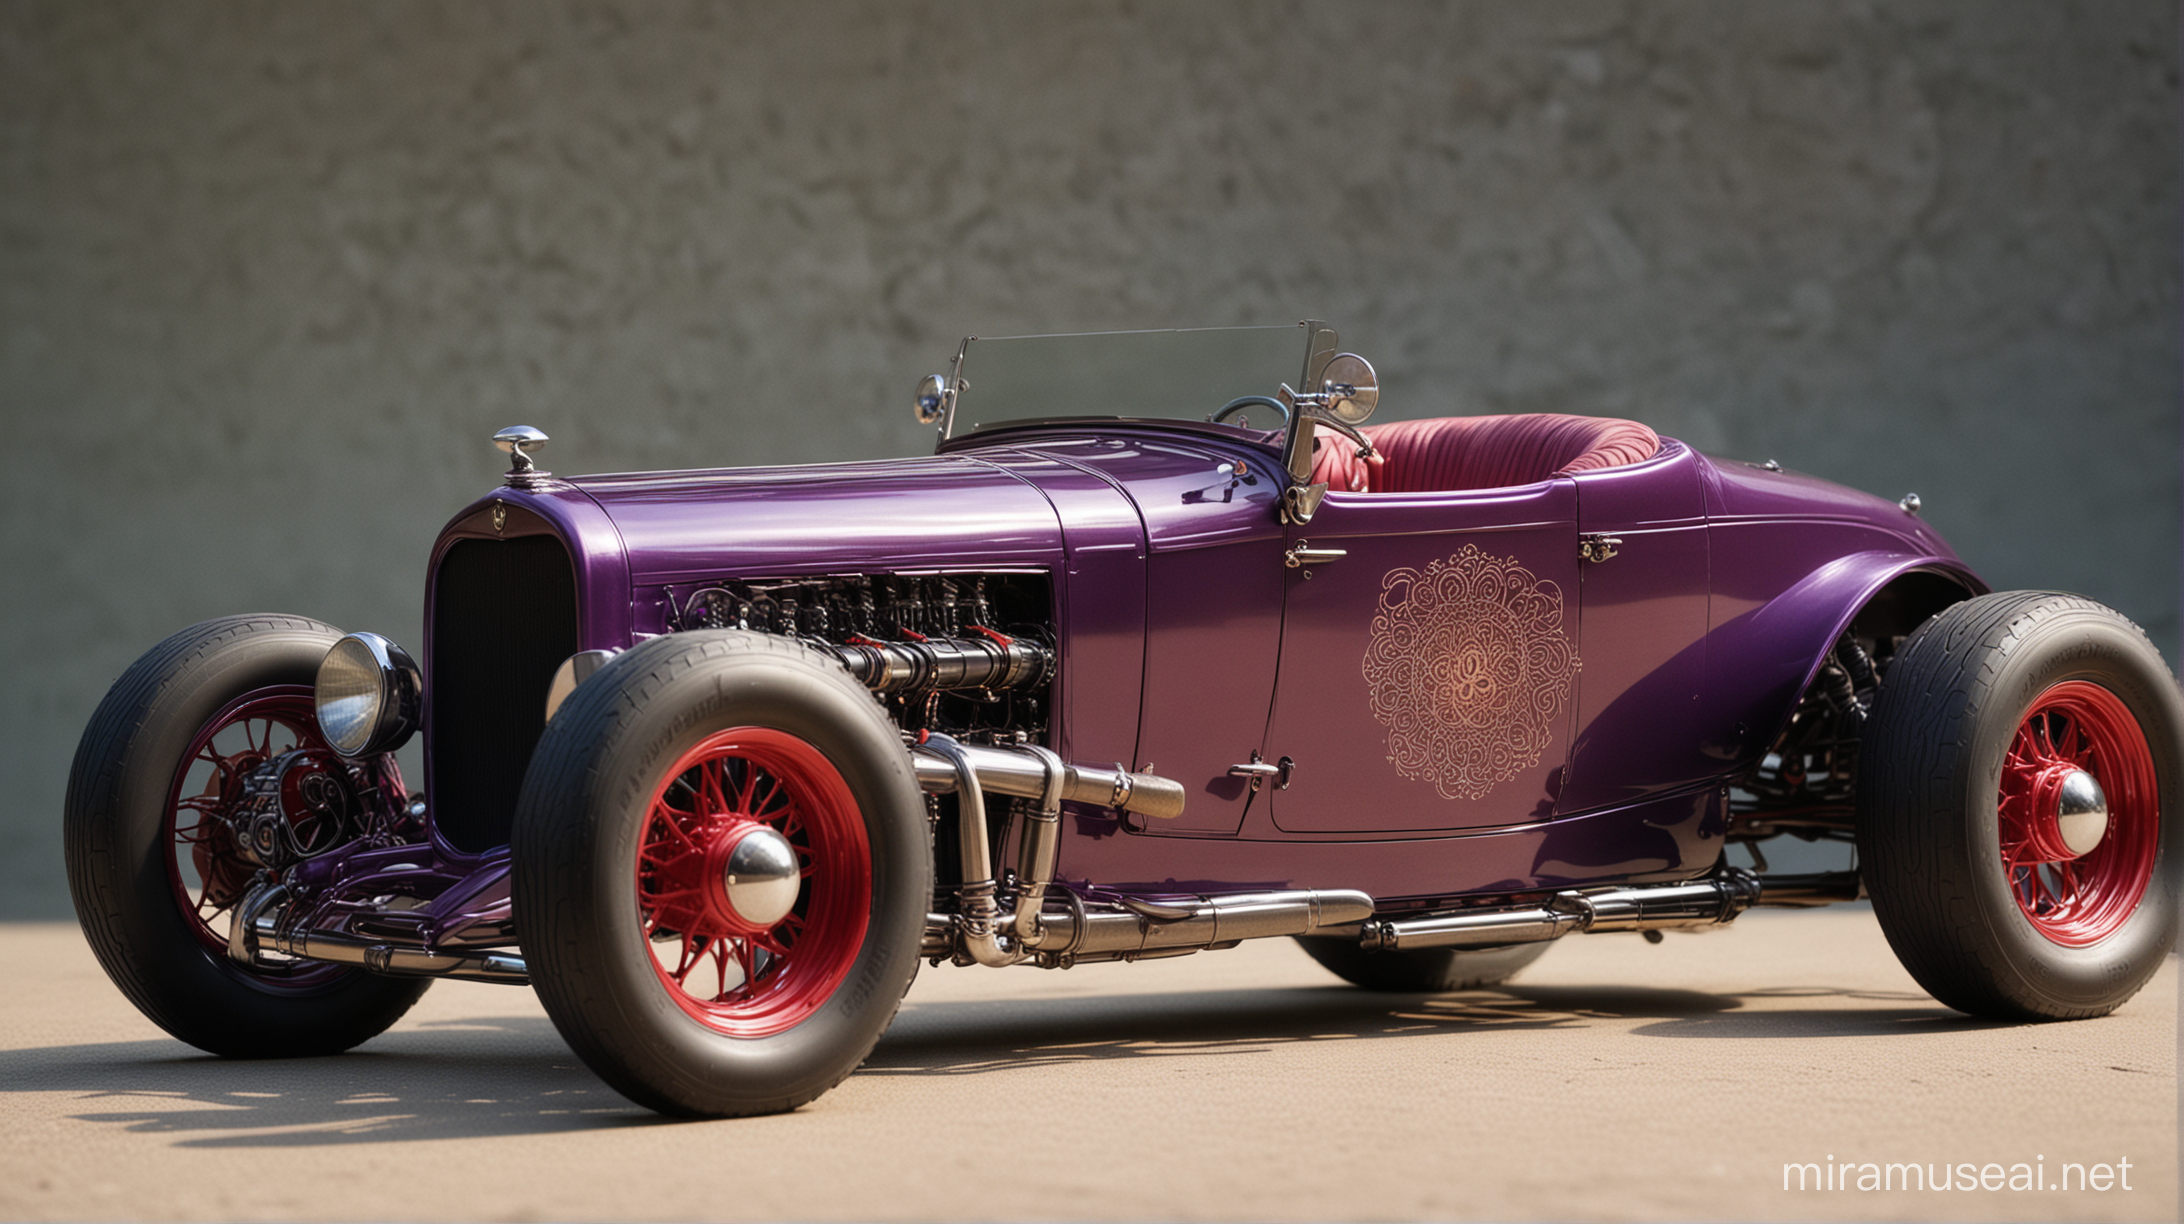 beautiful custom  1925. 3 - window coupe, with red to purple pearl paint, with fat rear slicks. A super - future, brutal hybrid - mechanical porcelain, love doll. She beauty exquisite. Wearing the most beautiful silk. . She is captured by the wide 35mm lens, creating a sense of depth. Art by Saturno Butto. In semi - transparent gouache. Taken with the Mamiya 6 x 4/5. wide 35 mm lens. 1 ISO. 4D exquisite octane render. photon - mapped shimmer. sacred dawn - light. exquisite loving motifs. created with the DP 2 Quattro